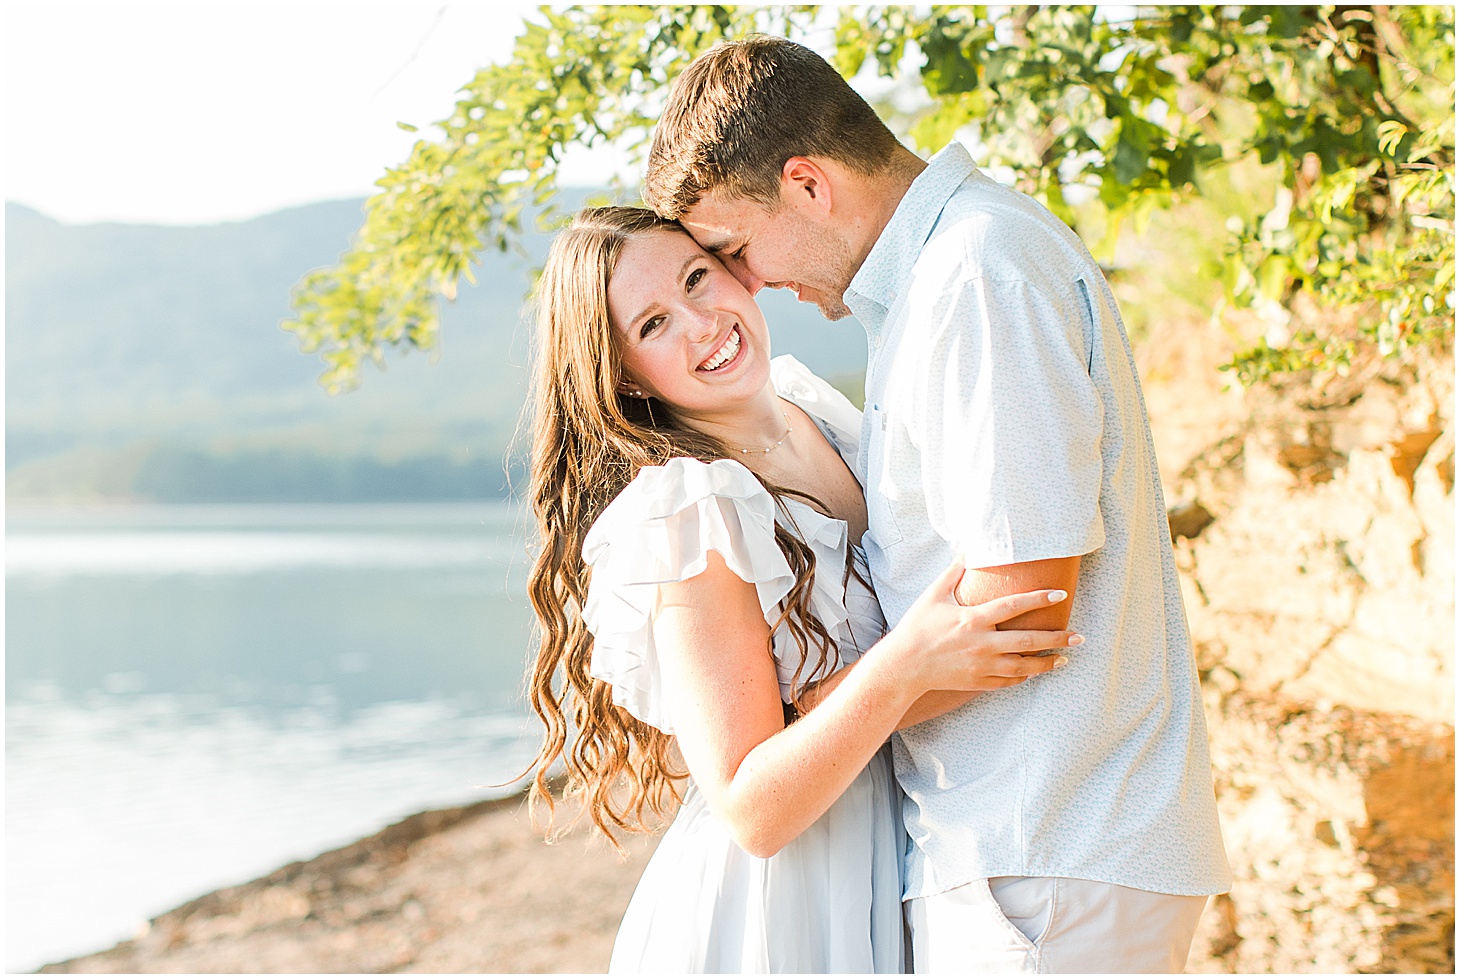 carvinscove_roanokeengagementsession_virginiaweddingphotographer_vaweddingphotographer_photo_0084.jpg